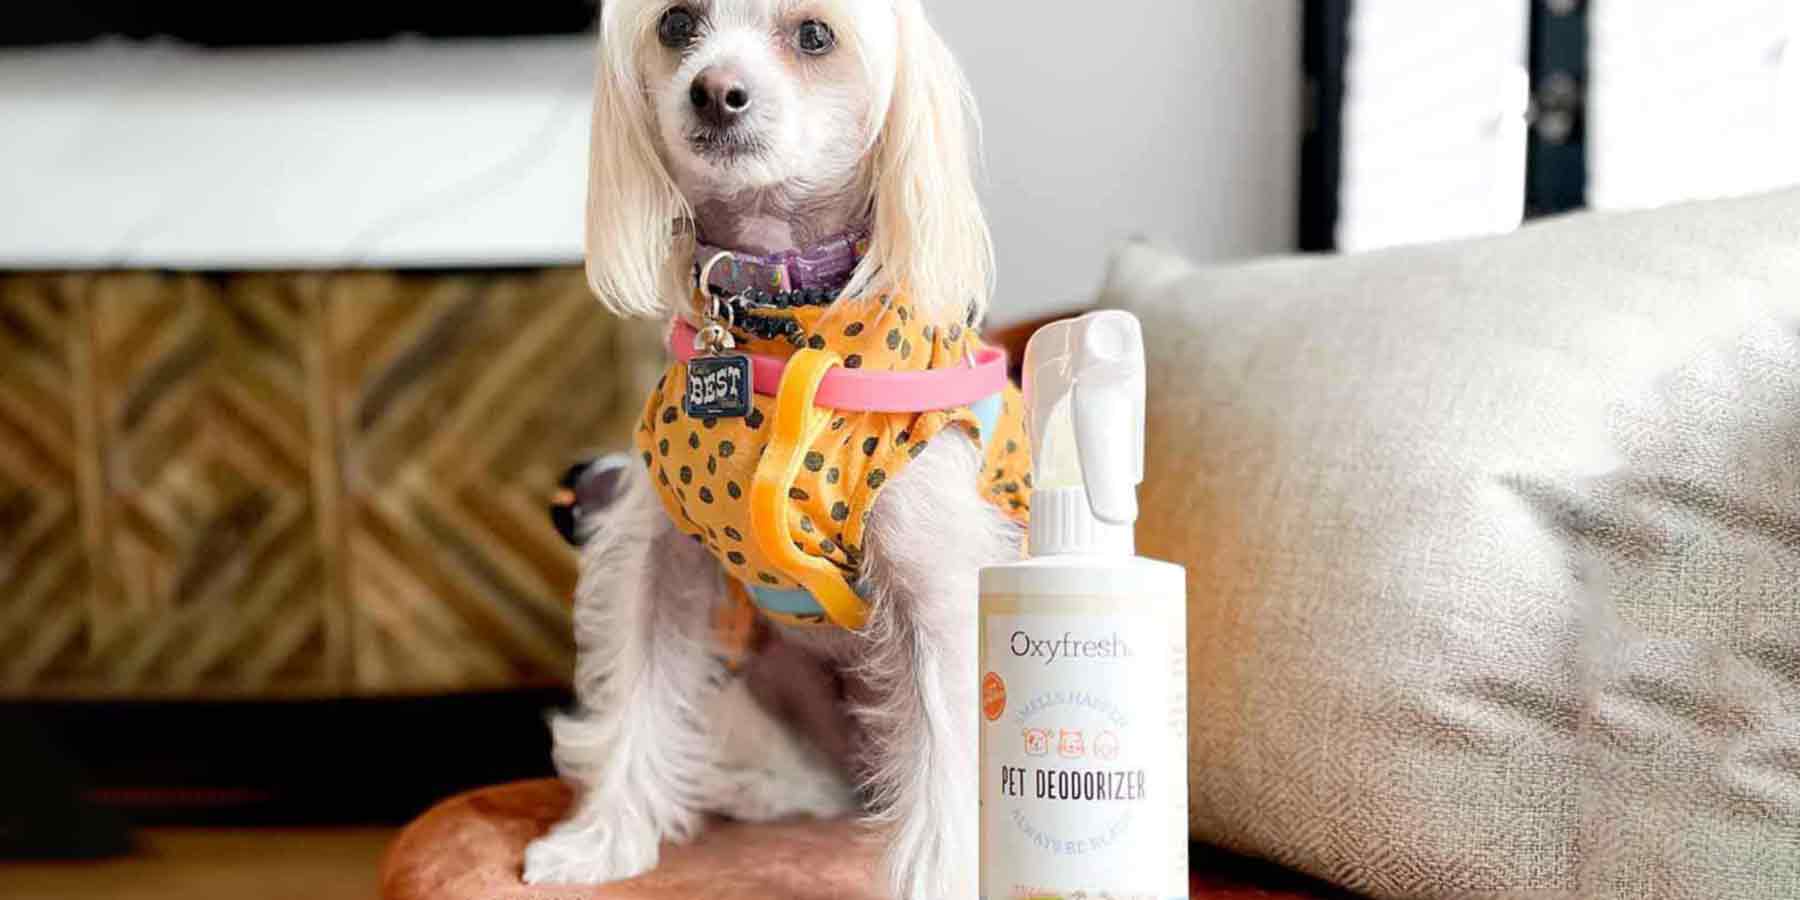 Social-Media-Post-From-Instagram-User-Laria-Herod-dog-sitting-on-couch-next-to-oxyfresh-pet-deodorizer-odor-eliminator-spray-which-eliminates-pet-odors-on-couches